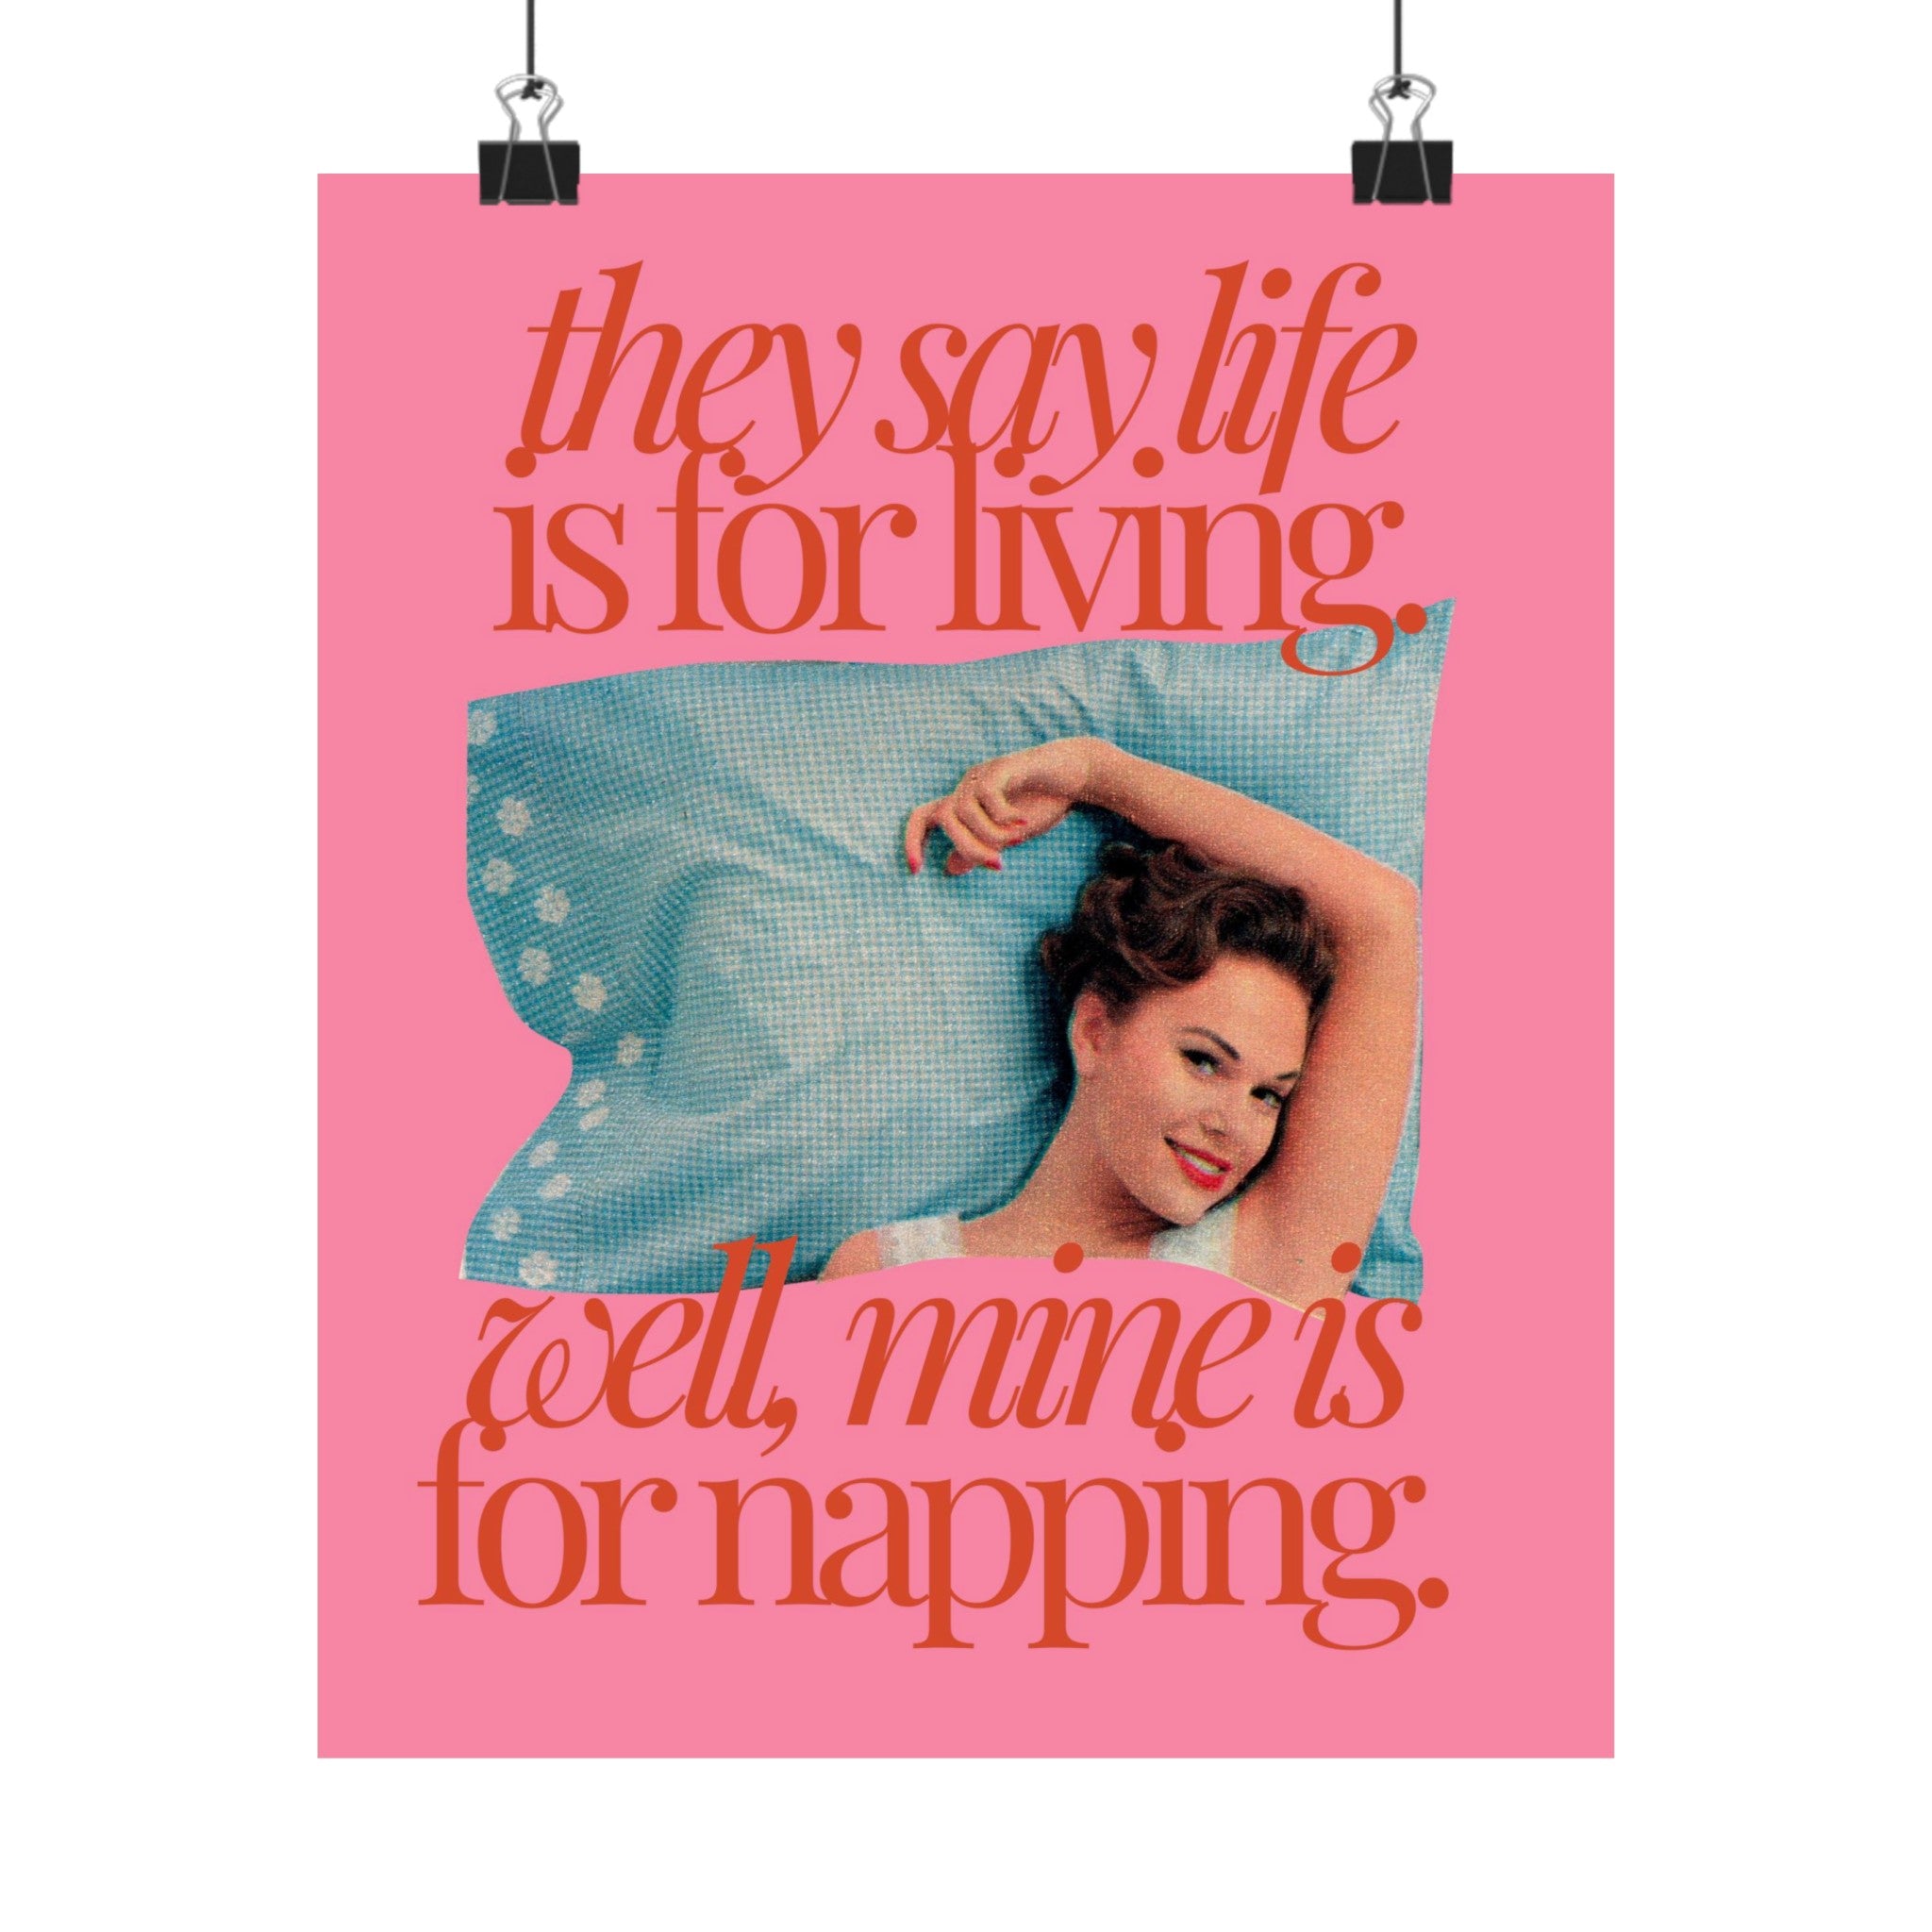 Life is For Napping Physical Poster